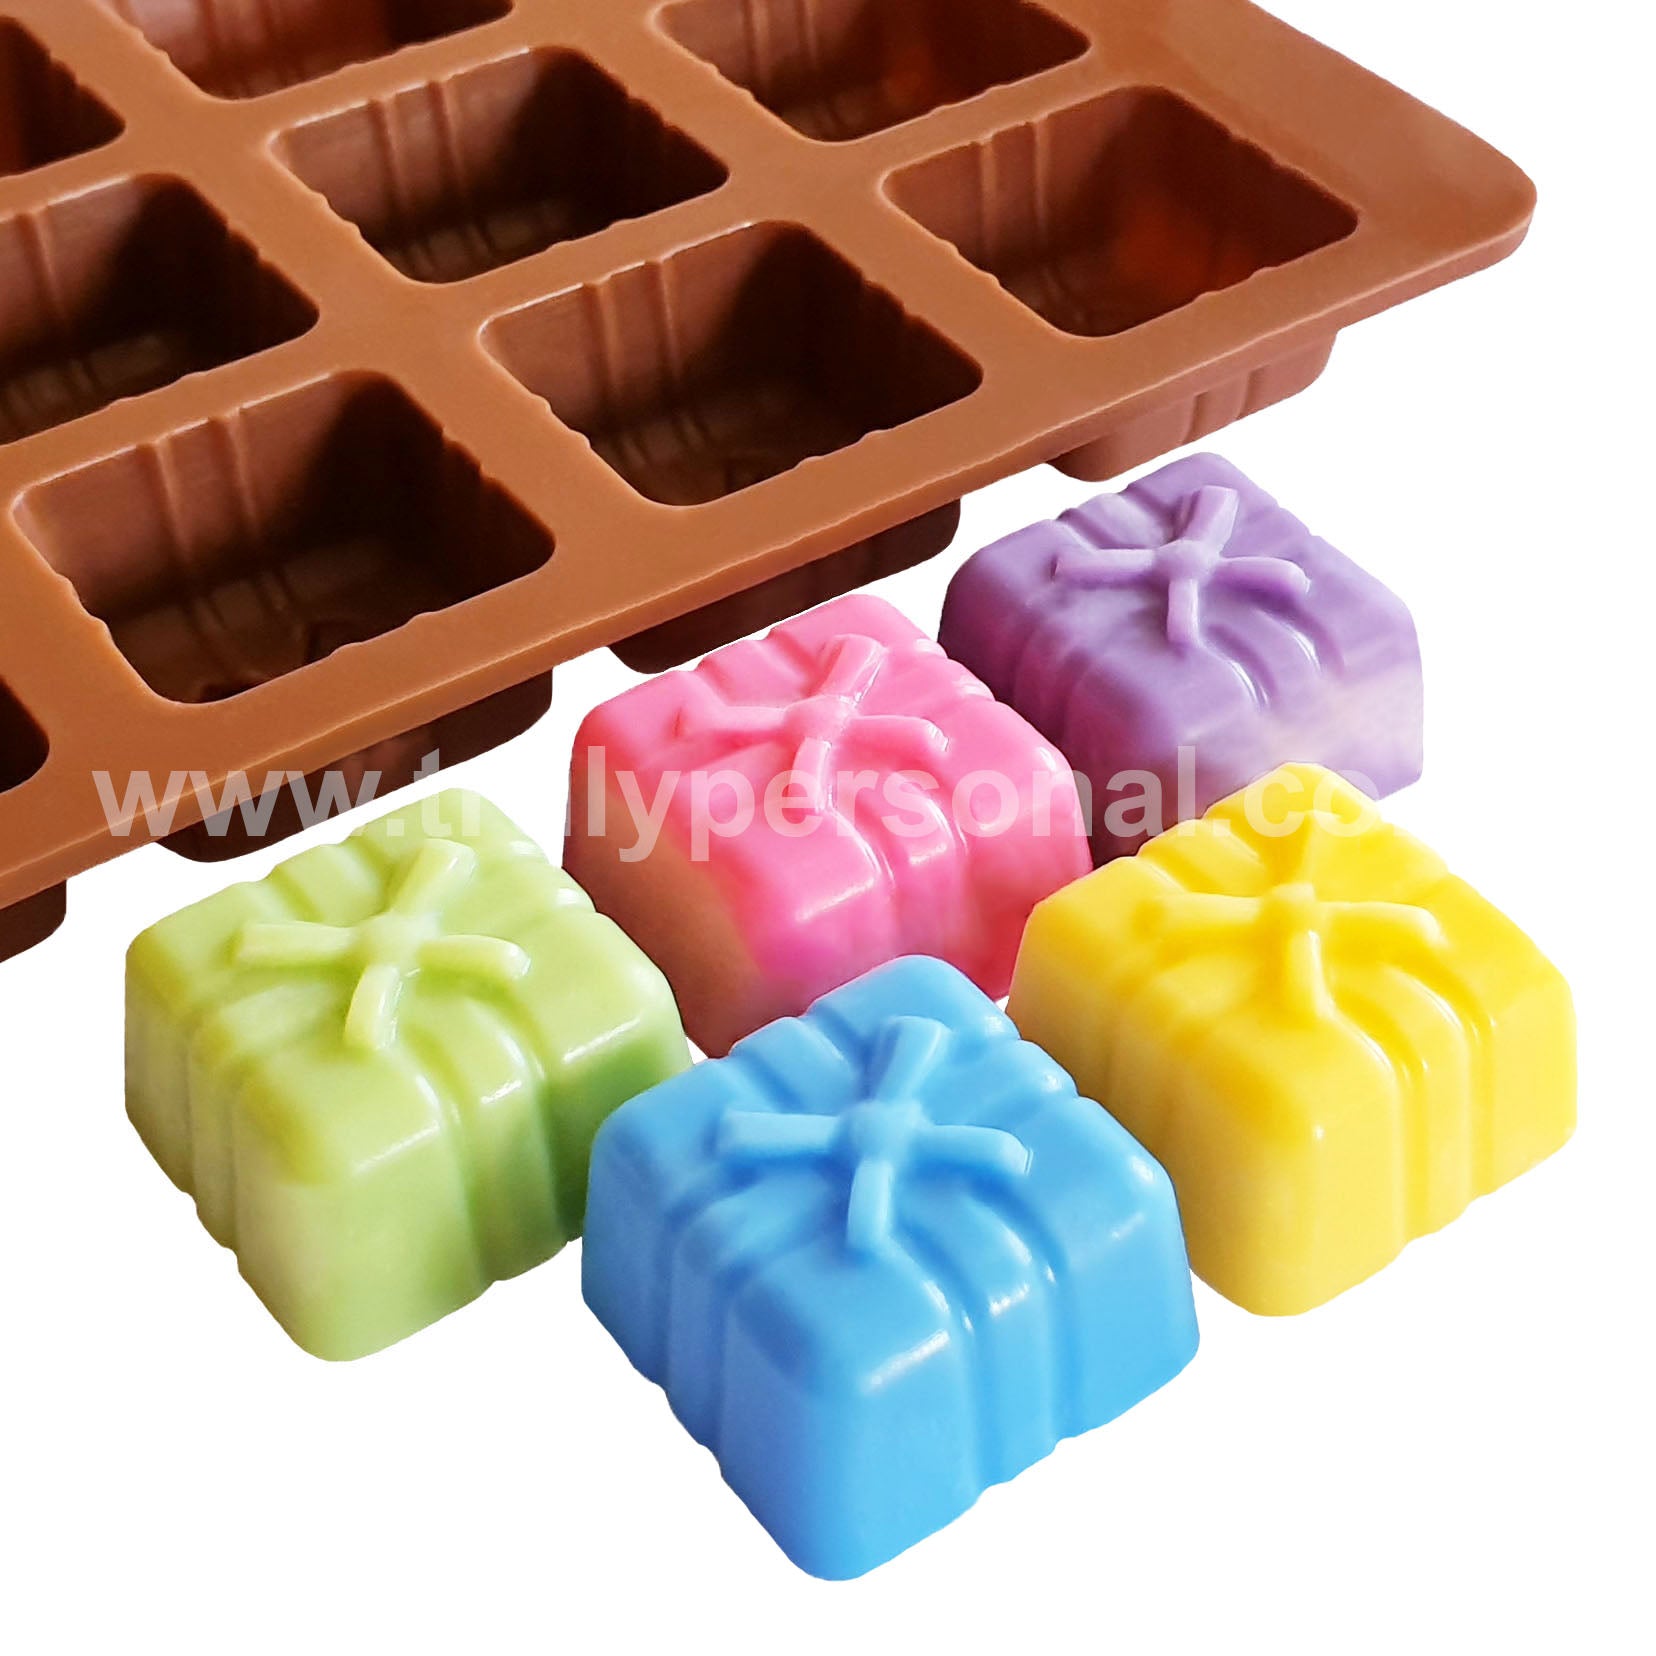 Present Silicone Mould | Wax Melts | Truly Personal Ltd